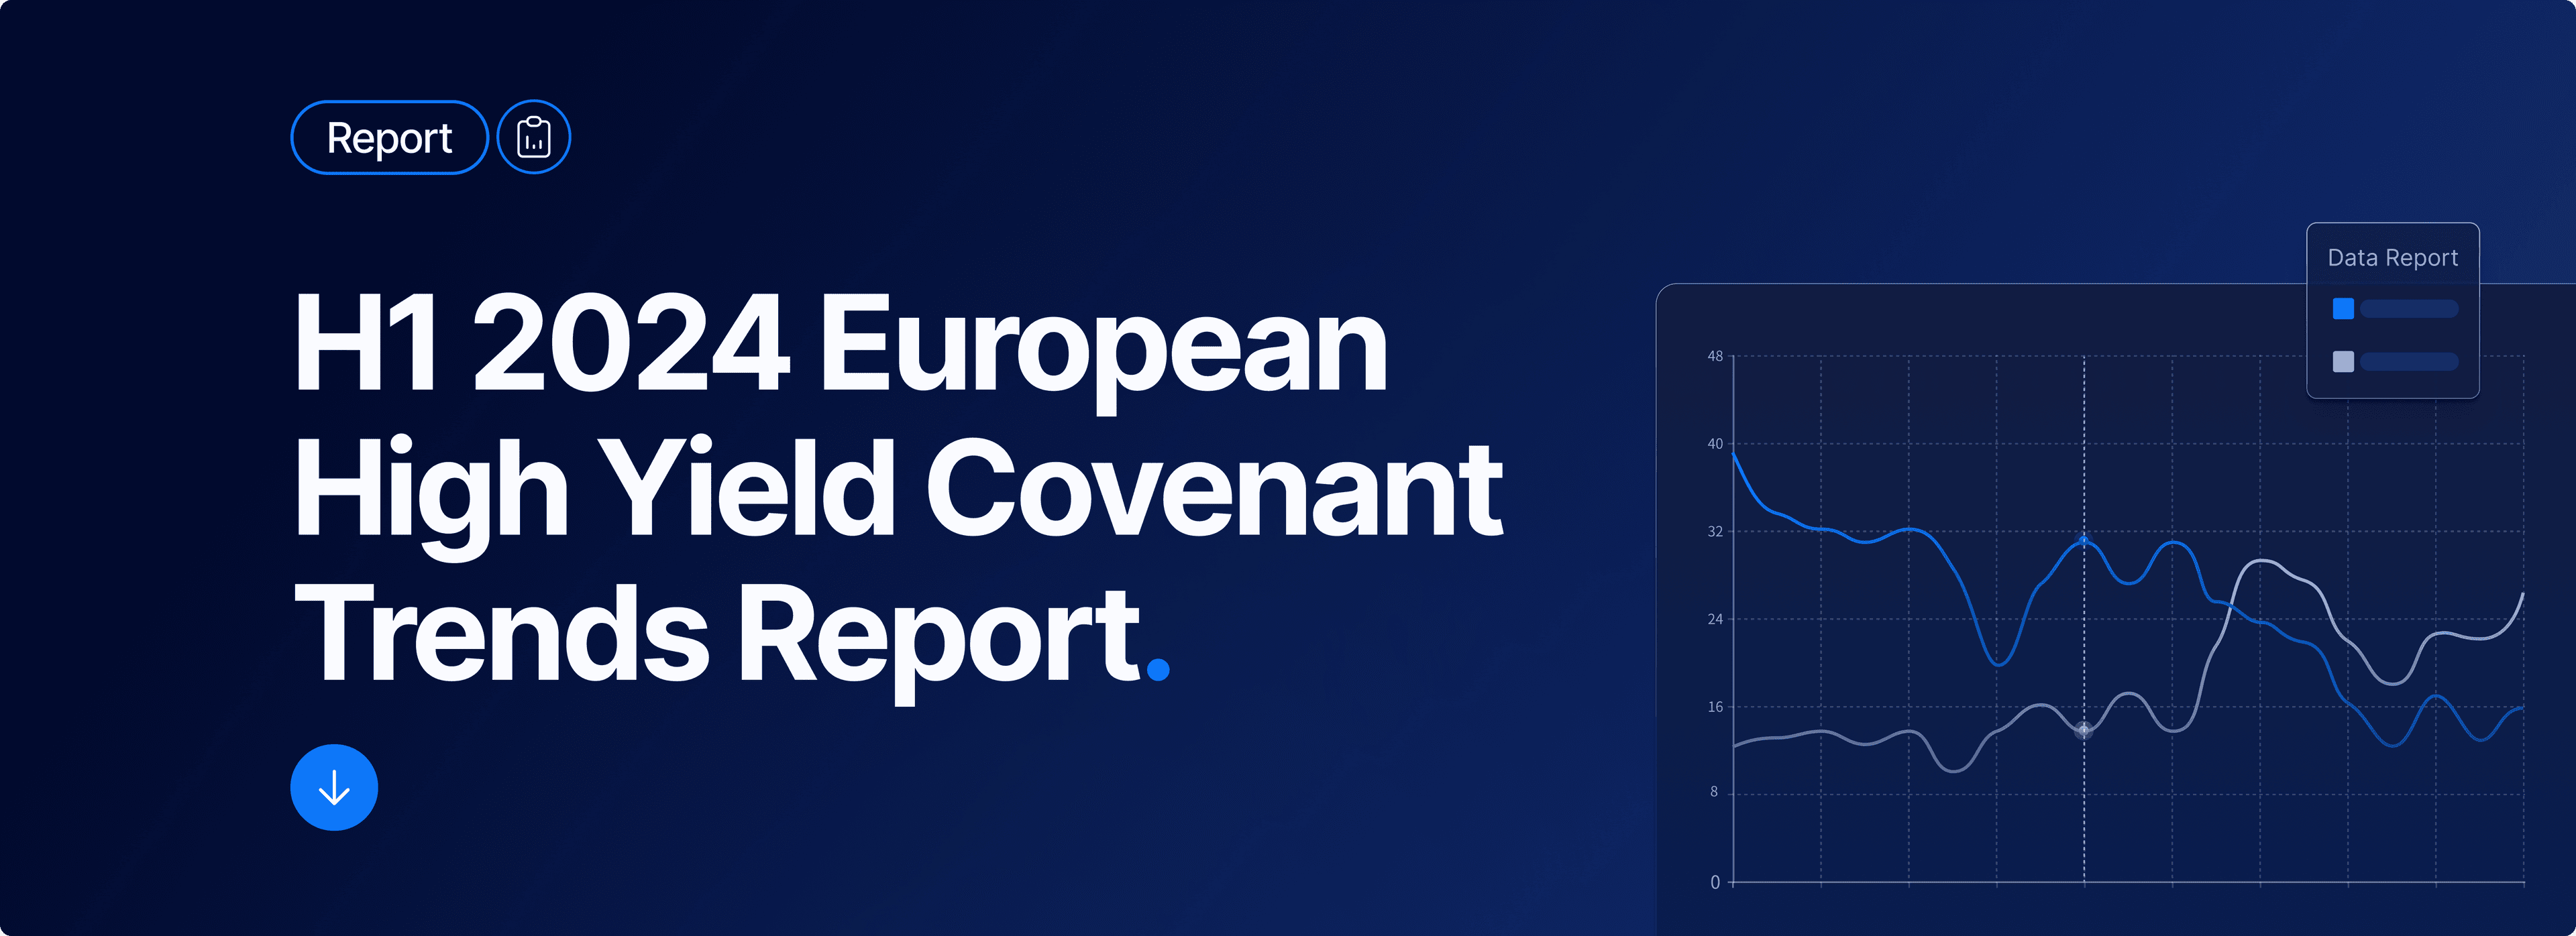 H1 2024 European High Yield Covenant Trends Report